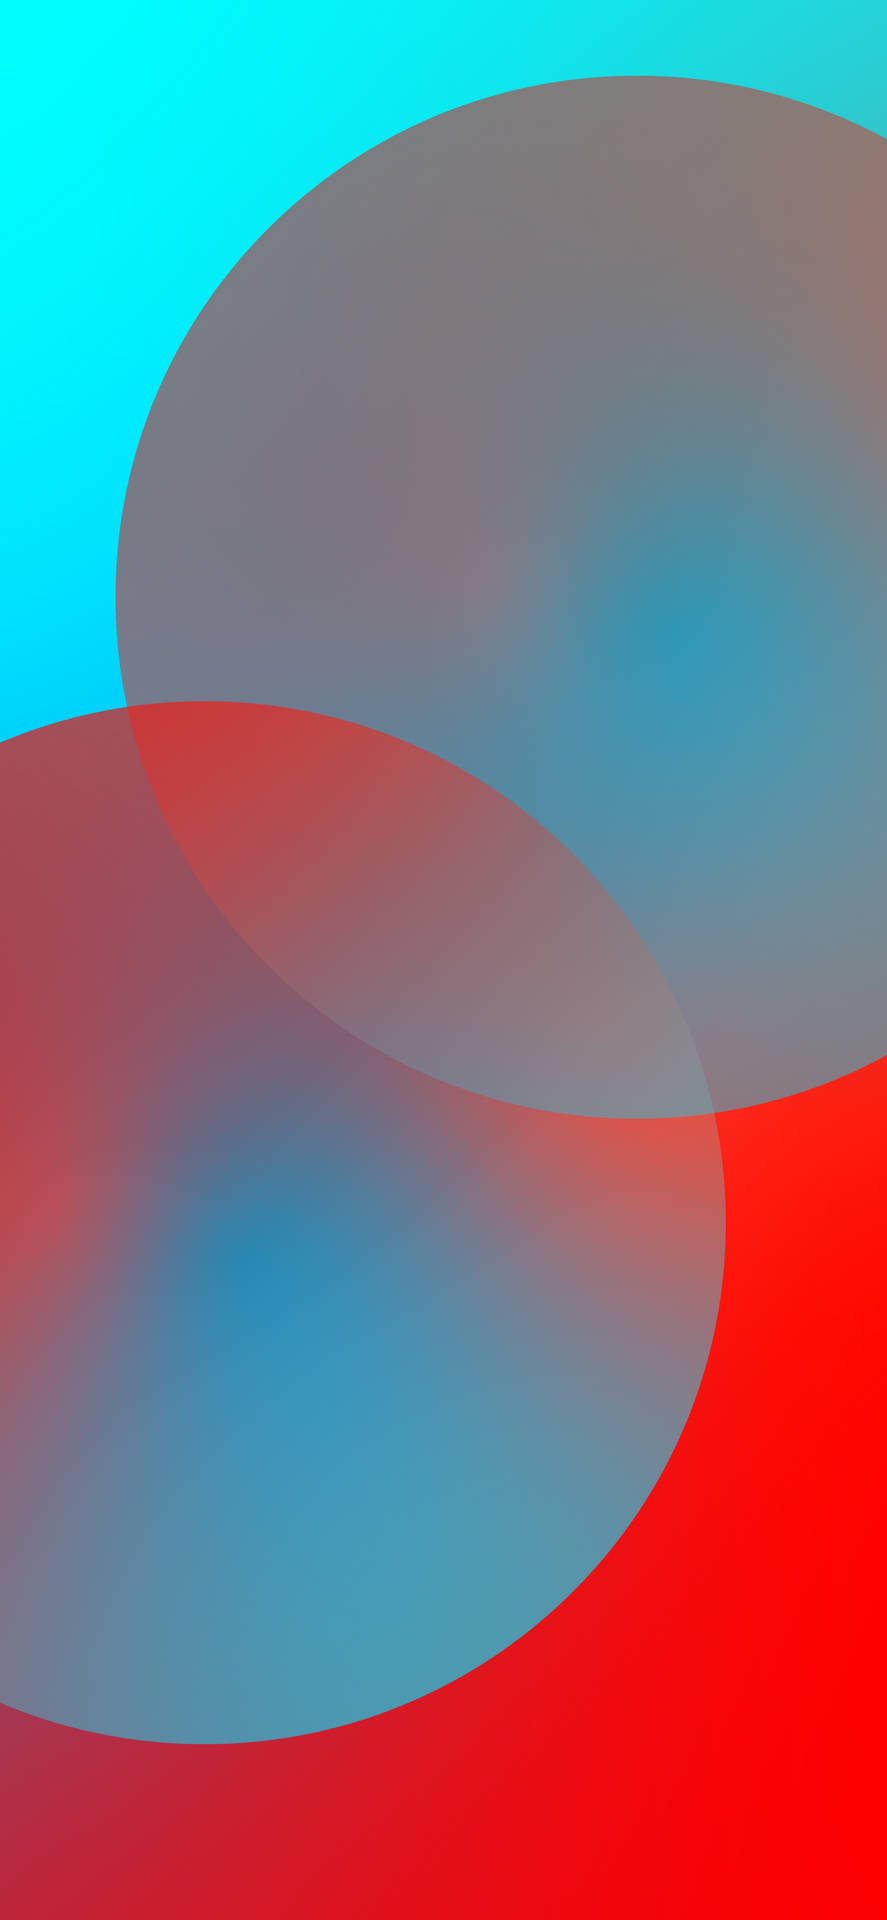 Two Circles Abstract Iphone Wallpaper